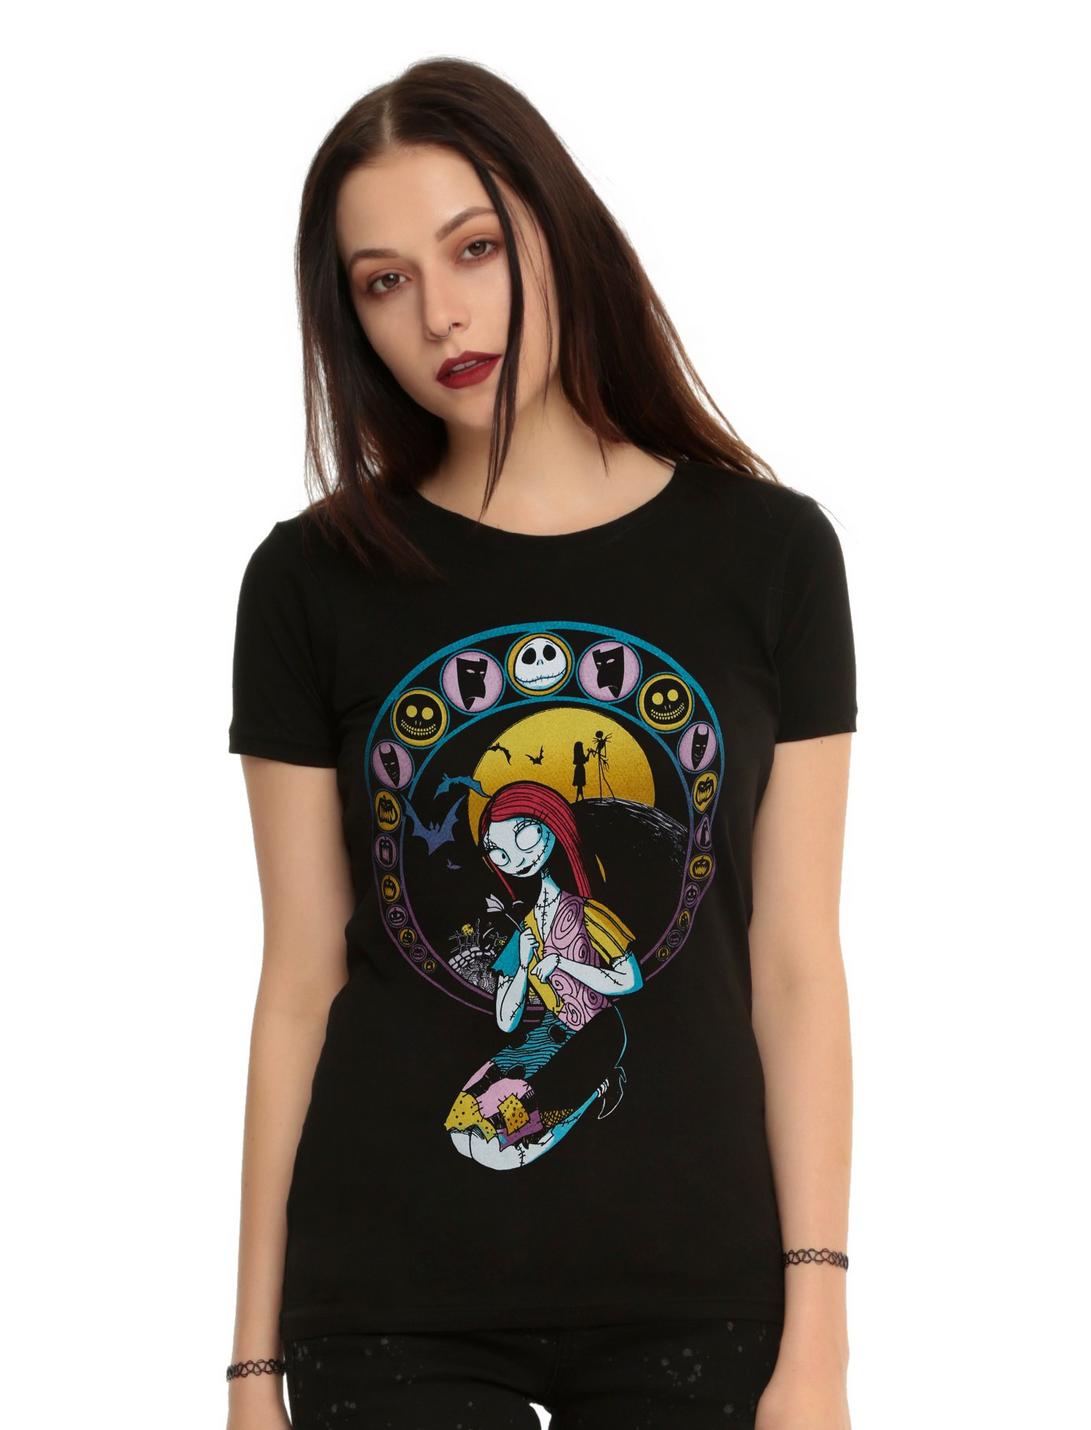 The Nightmare Before Christmas Sally Nouveau Girls T-Shirt, BLACK, hi-res